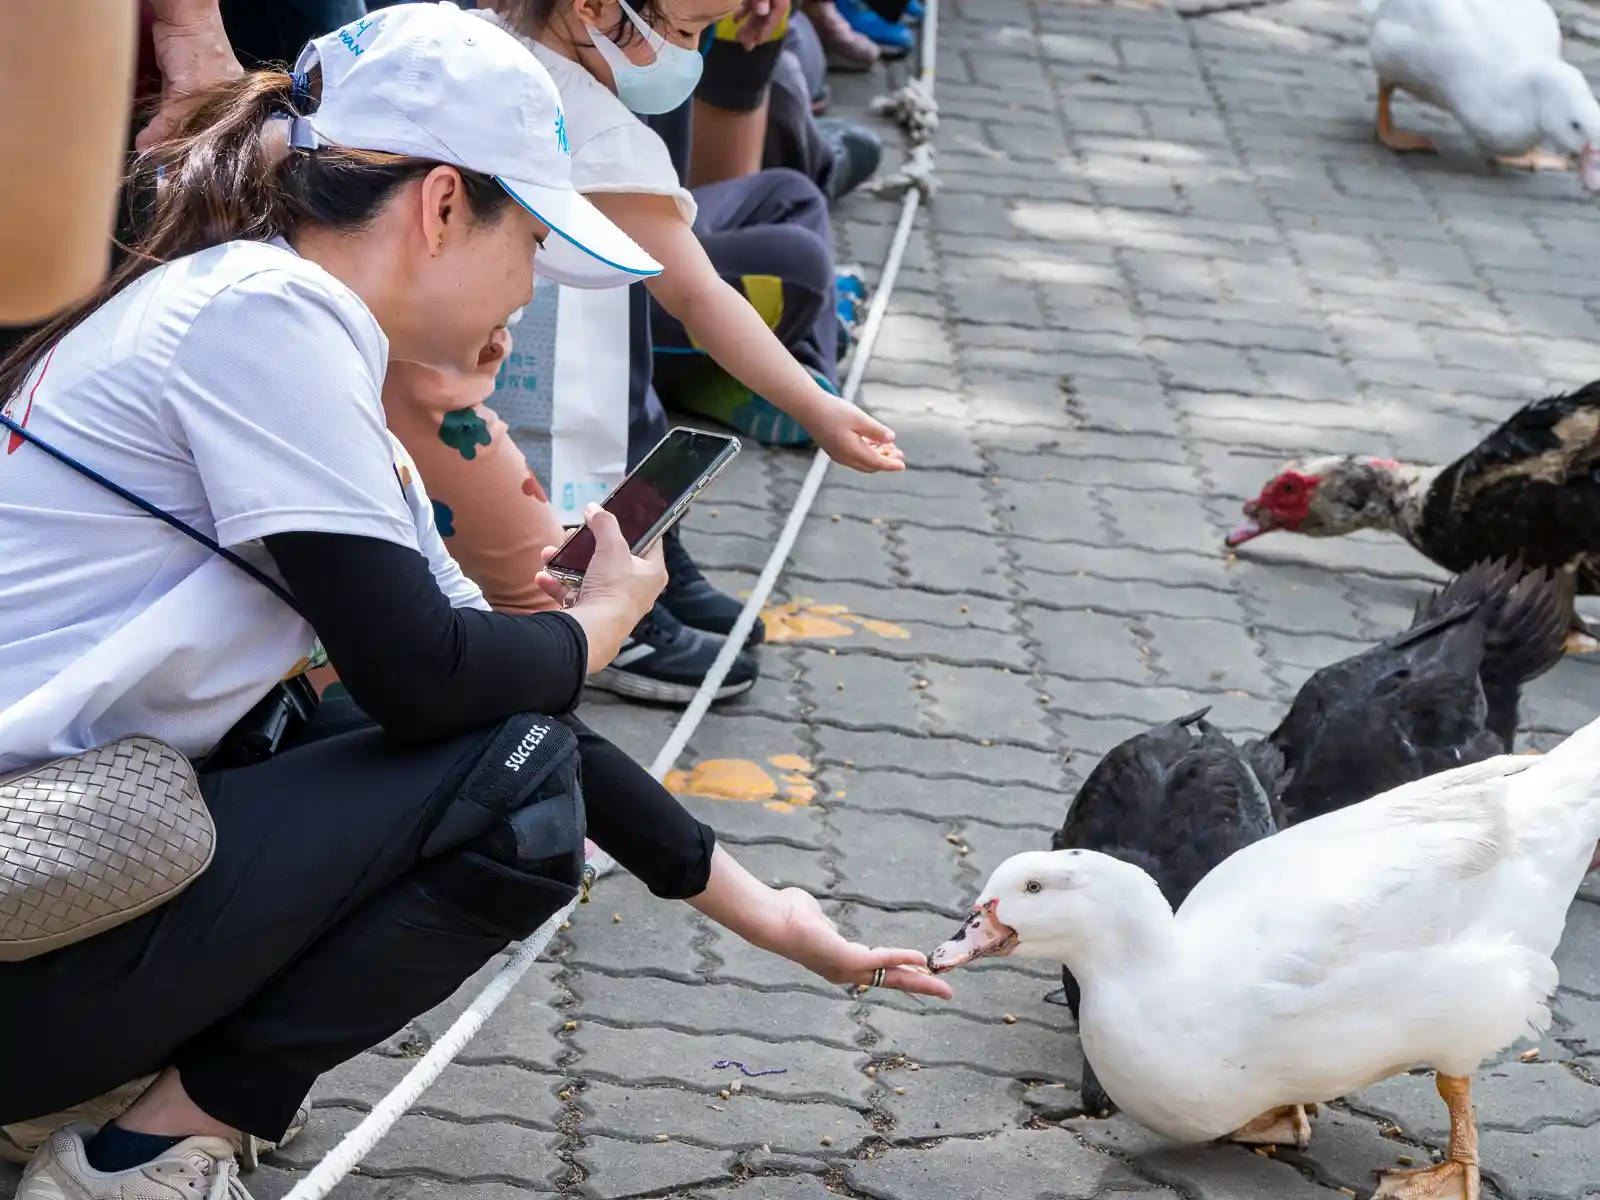 A tourist feeds a duck from her hand.